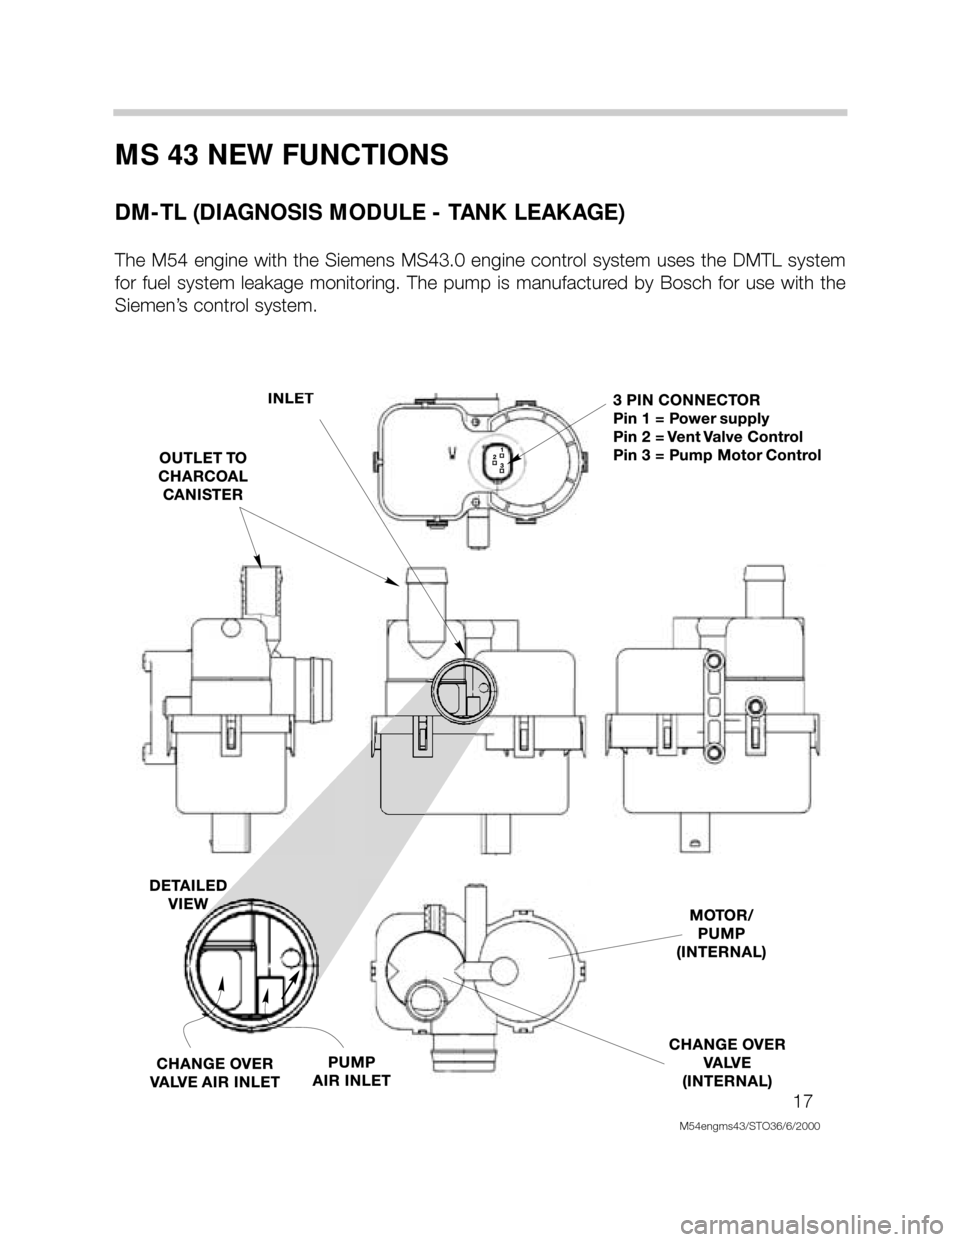 BMW X5 1999 E53 M54 Engine User Guide 17
M54engms43/STO36/6/2000
MS 43 NEW FUNCTIONS
DM-TL (DIAGNOSIS MODULE - TANK LEAKAGE)
The  M54  engine  with  the  Siemens  MS43.0  engine  control  system  uses  the  DMTL  system
for  fuel  system 